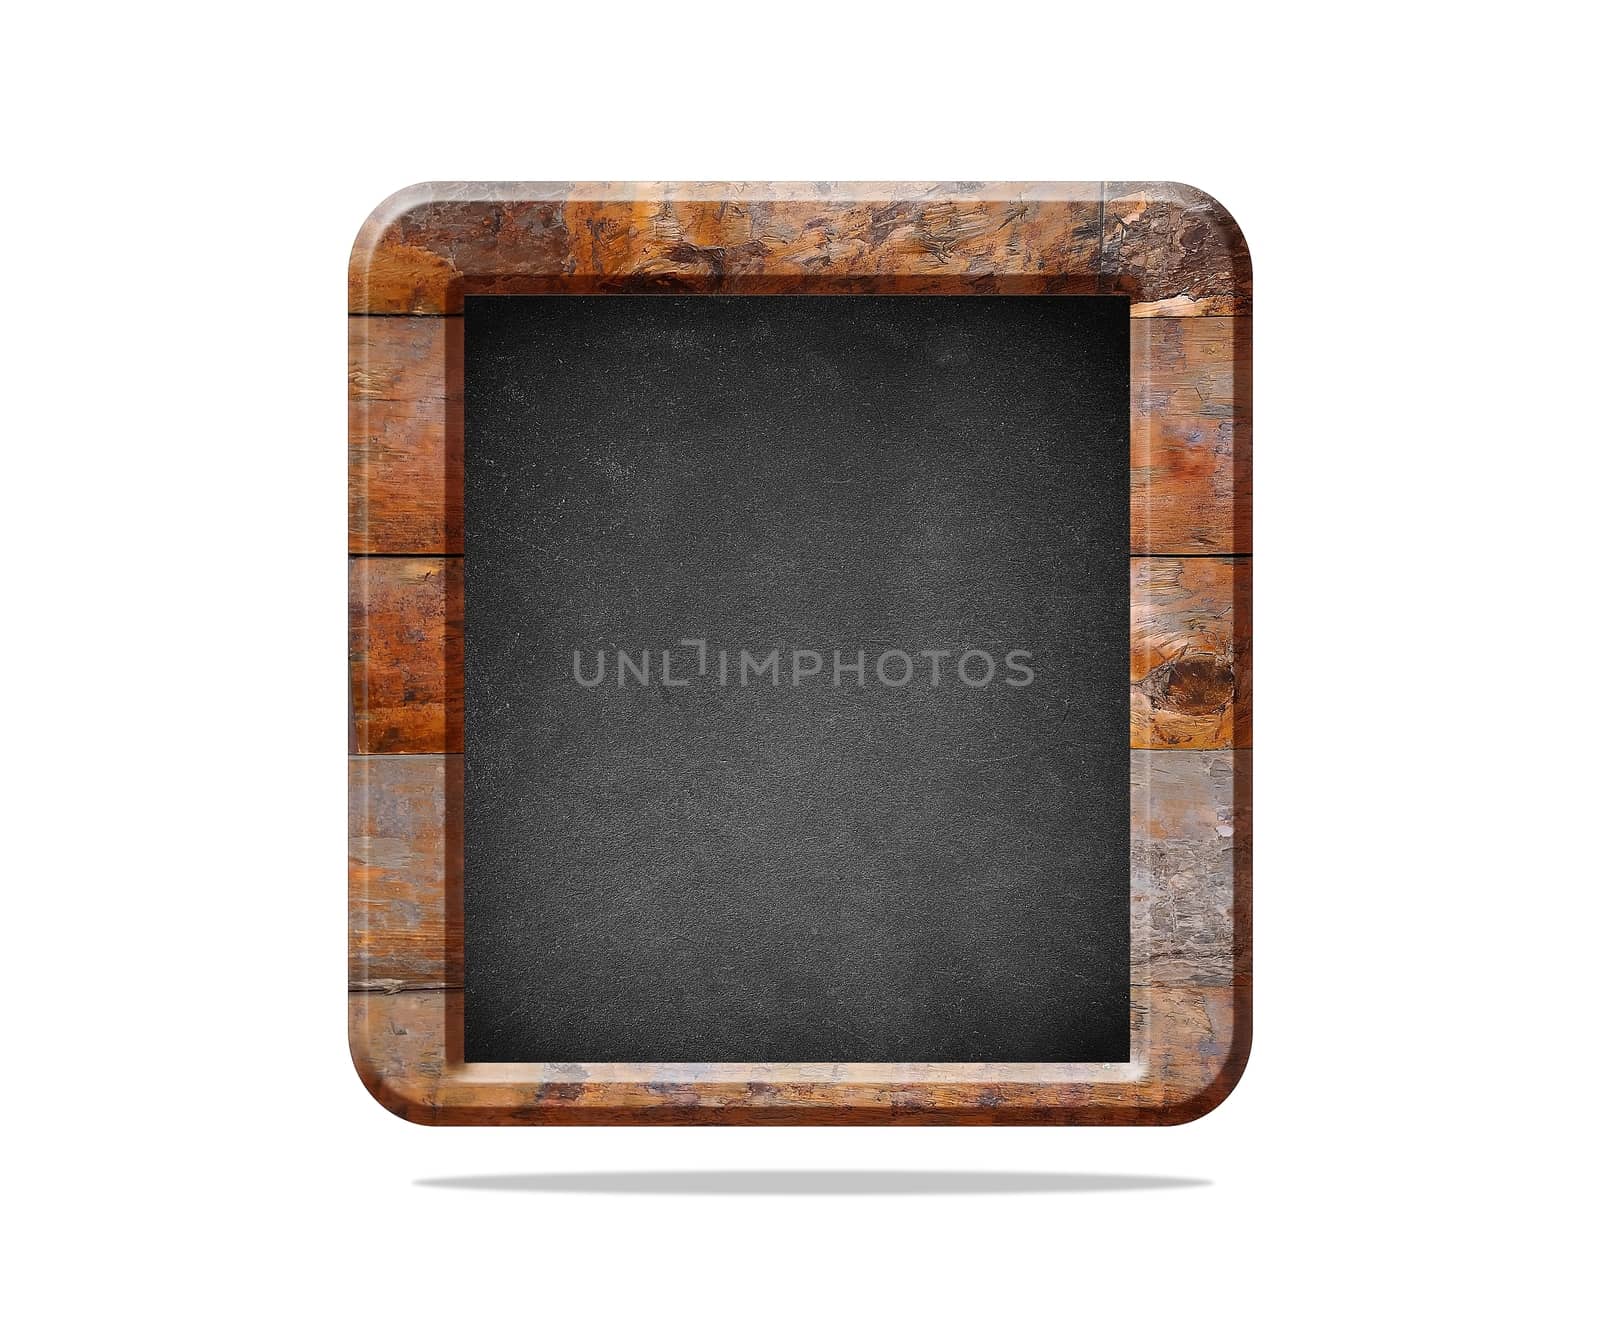 Wooden blackboard with clear space to write and isolated on white background